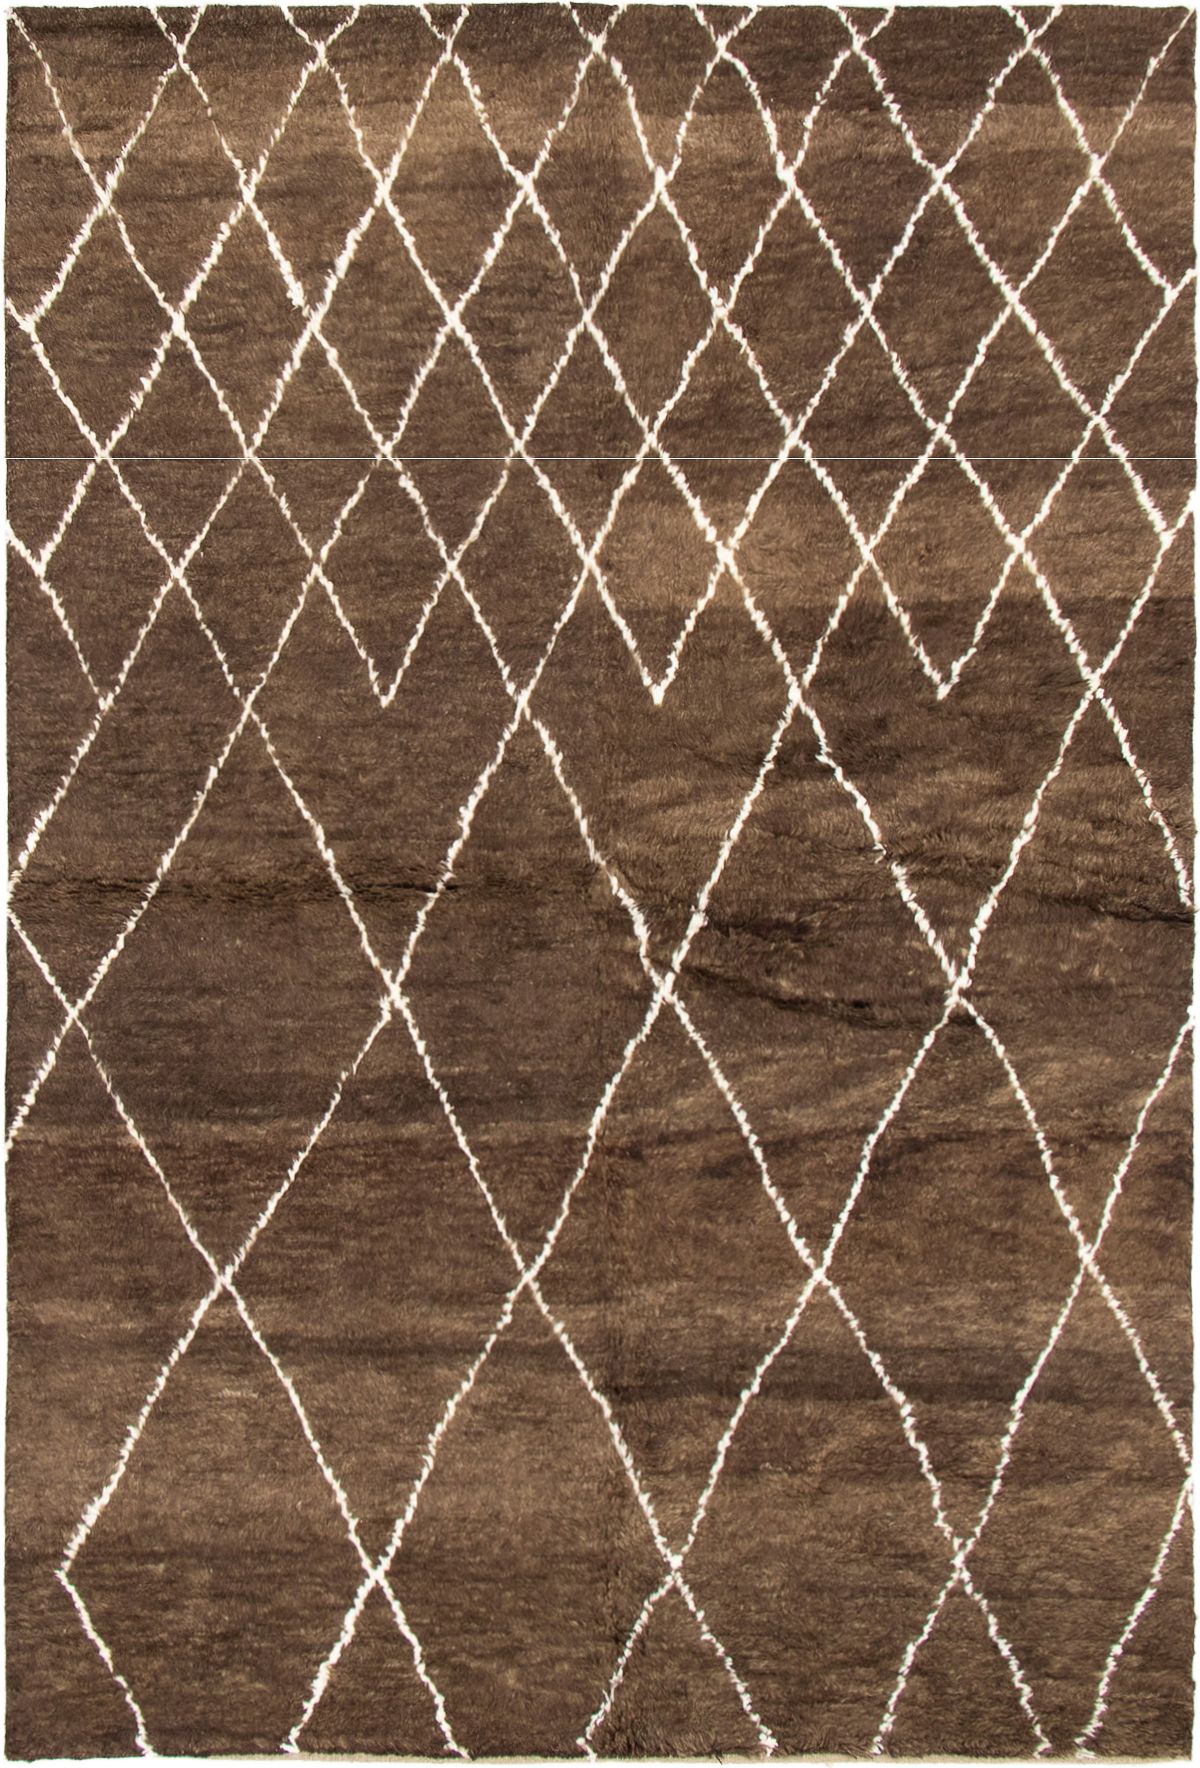 Hand-knotted Arlequin Dark Brown Wool Rug 6'2" x 9'2" Size: 6'2" x 9'2"  